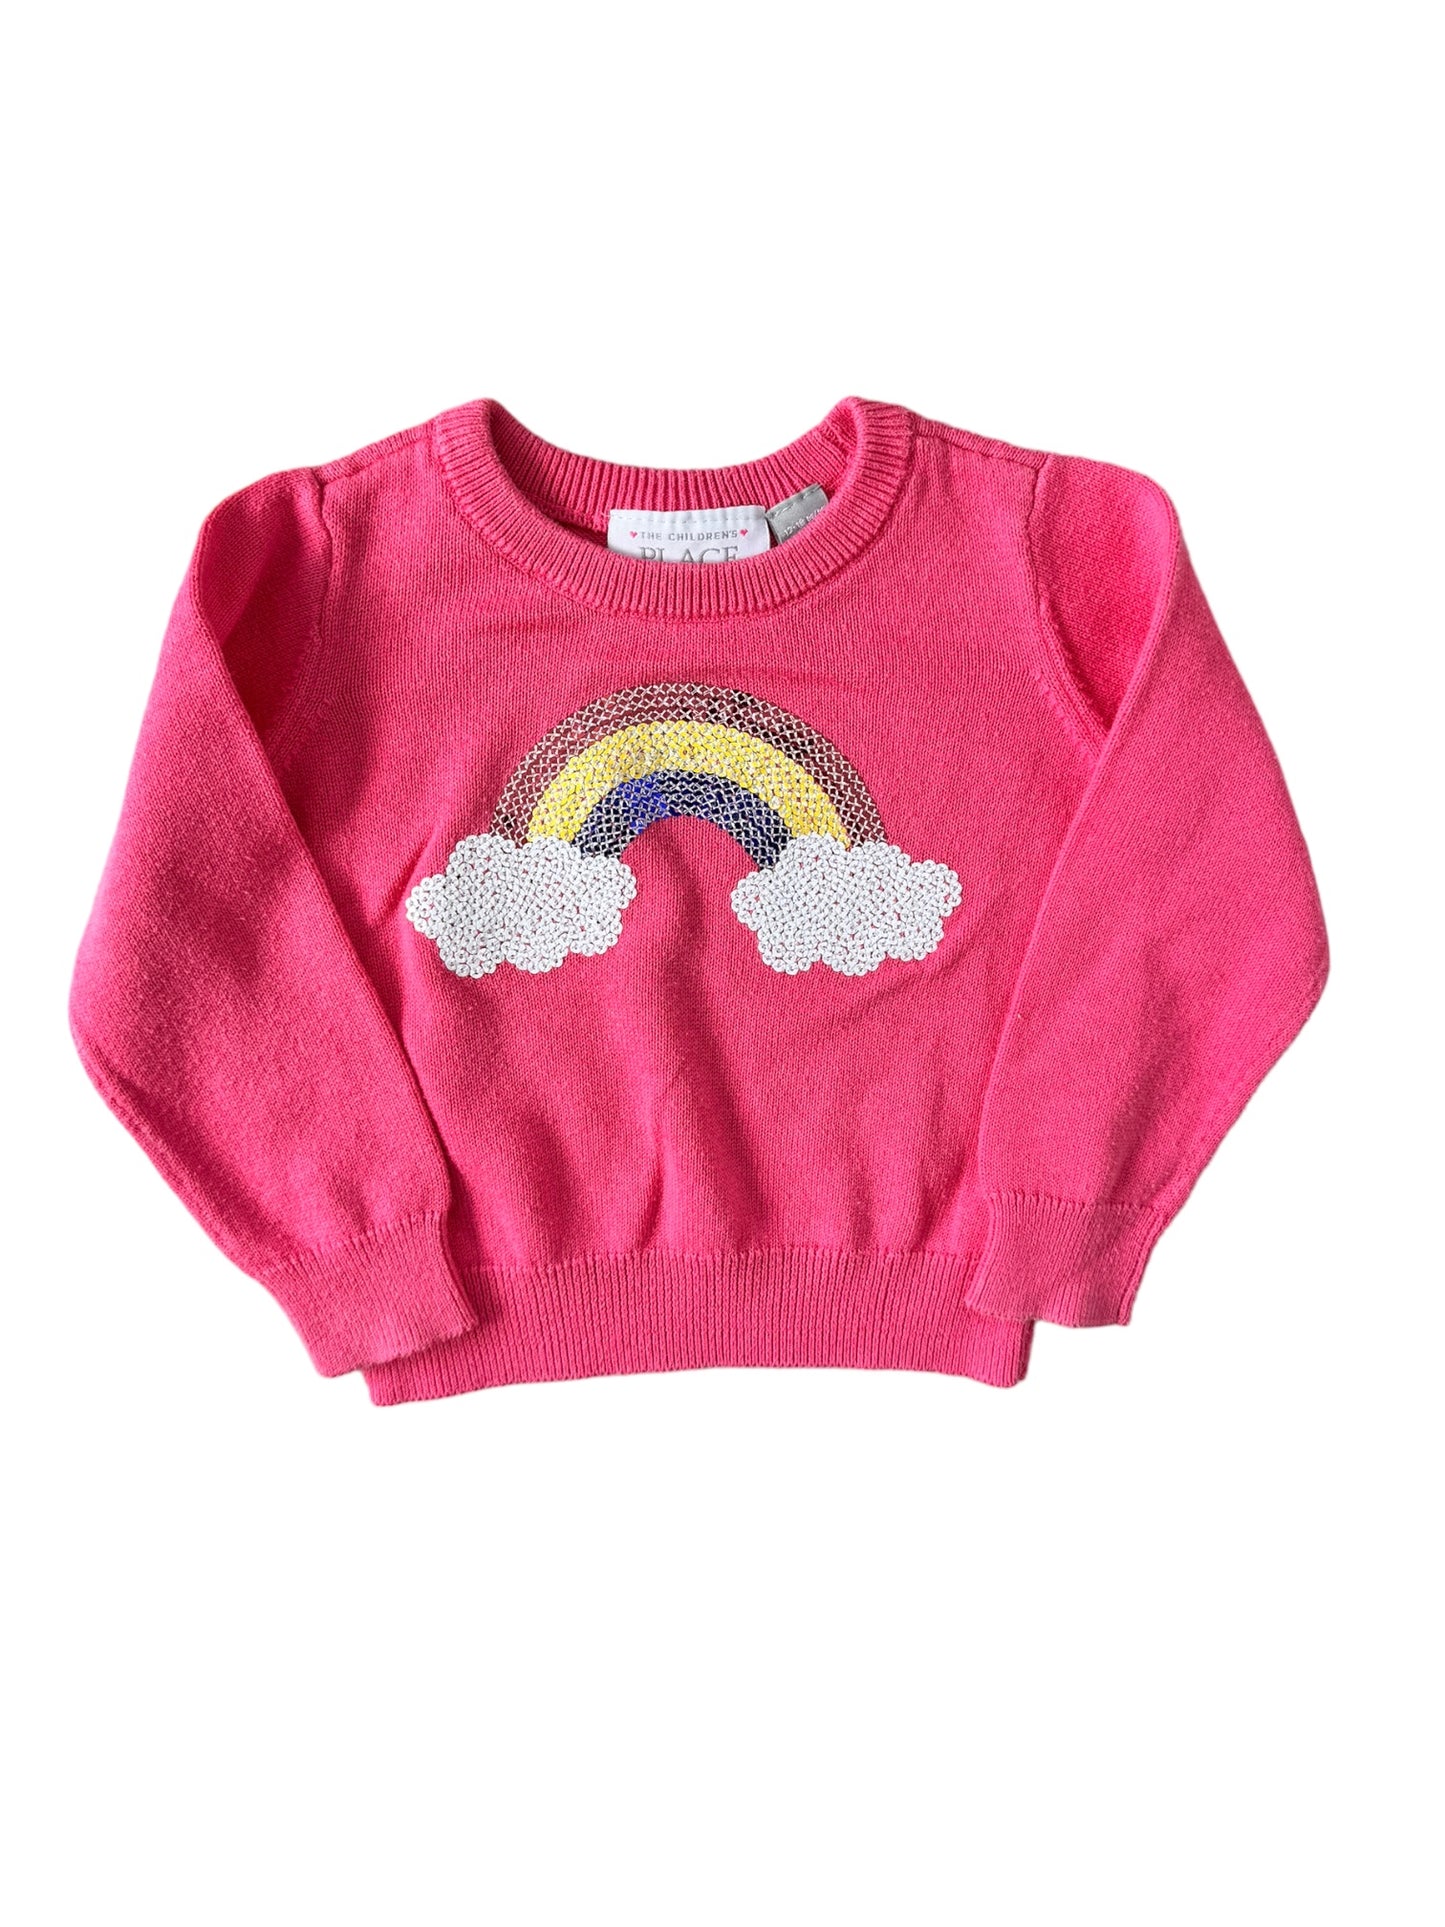 The Childrens Place top | Size: 12-18 months | EUC